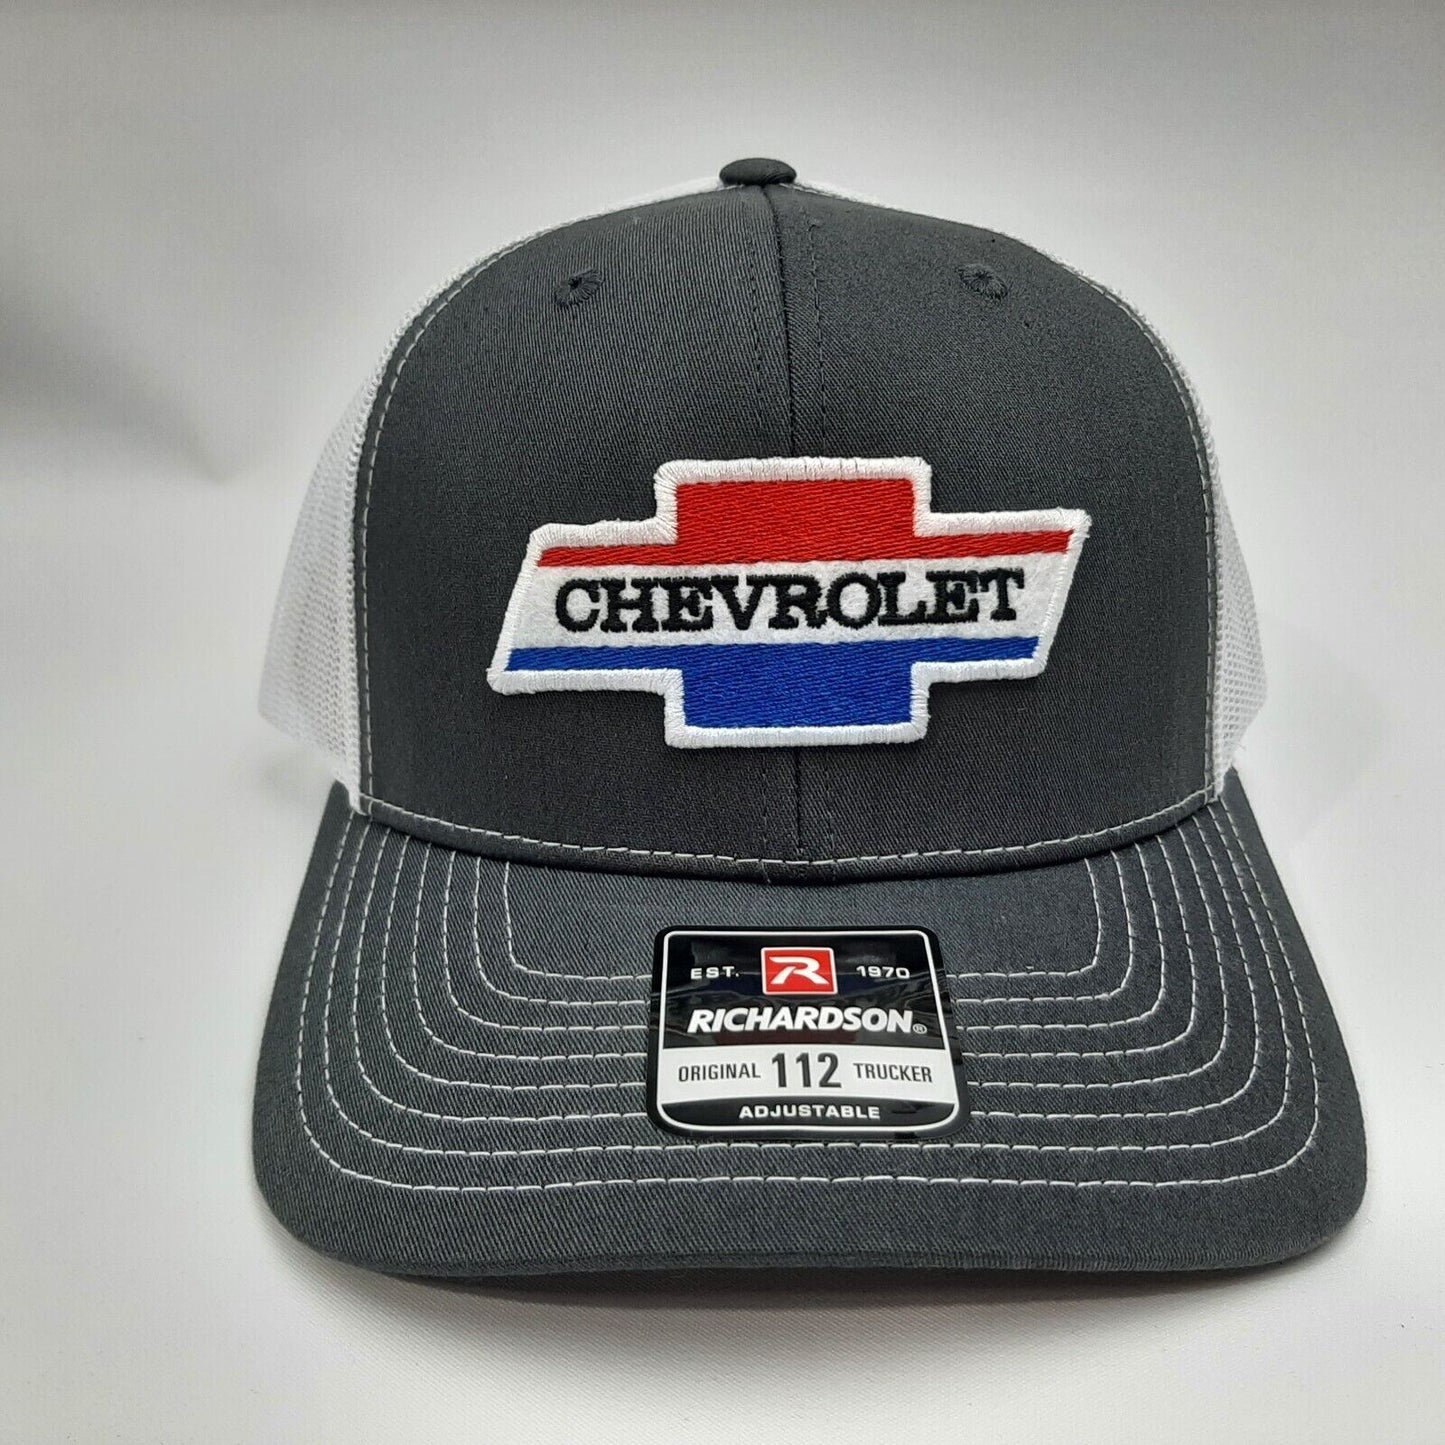 Chevrolet Chevy Embroidered Patch Richardson 112 Trucker Mesh Snapback Cap Hat Gray & White